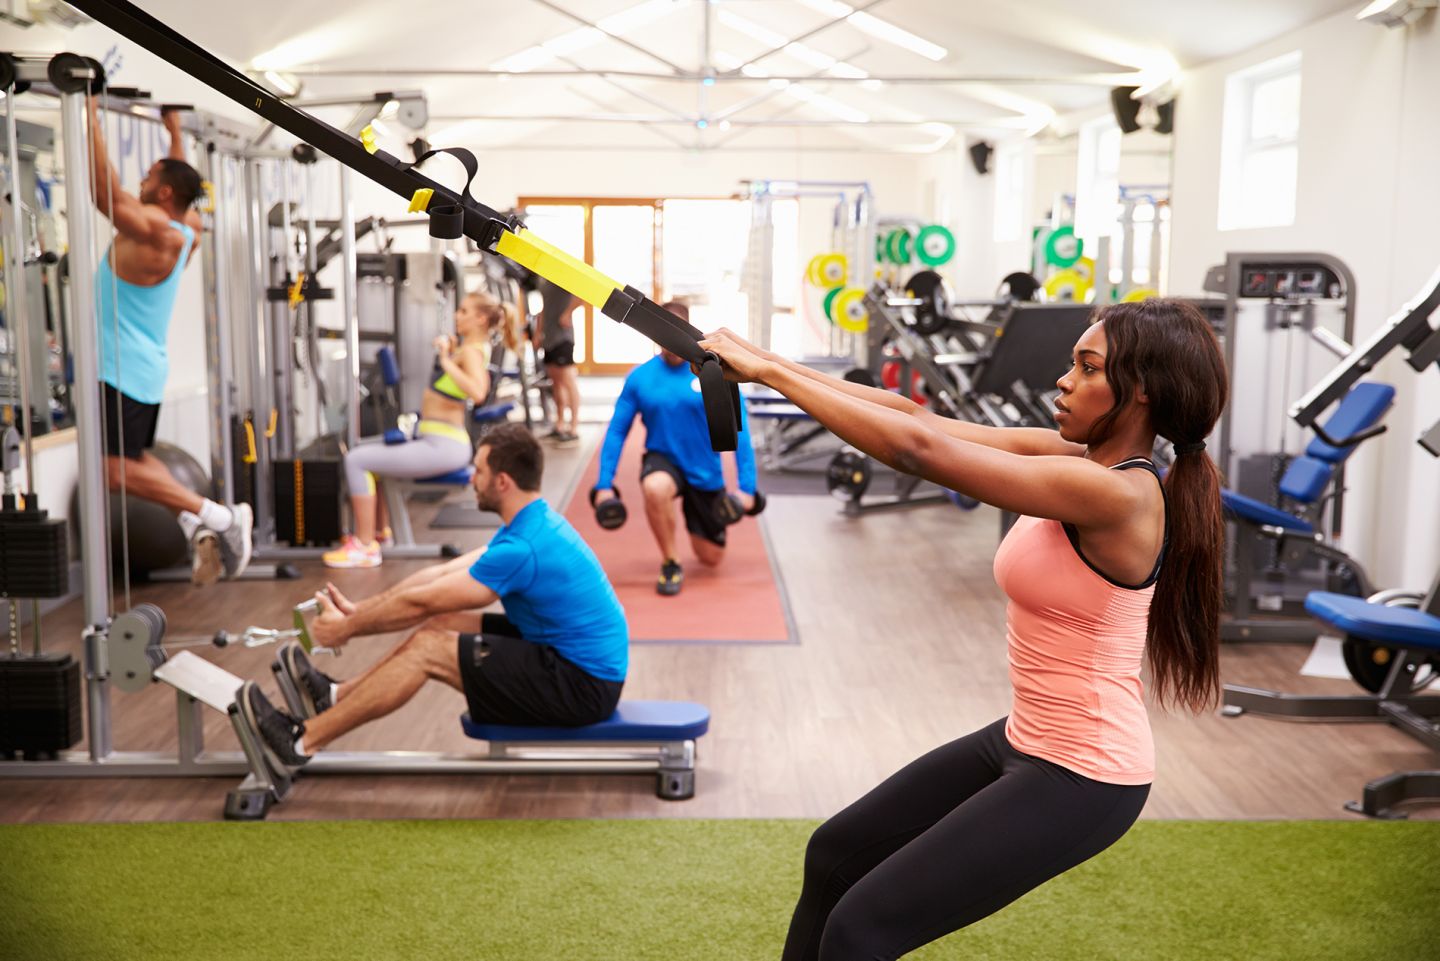 What Healthcare Systems Can Learn From Health Clubs